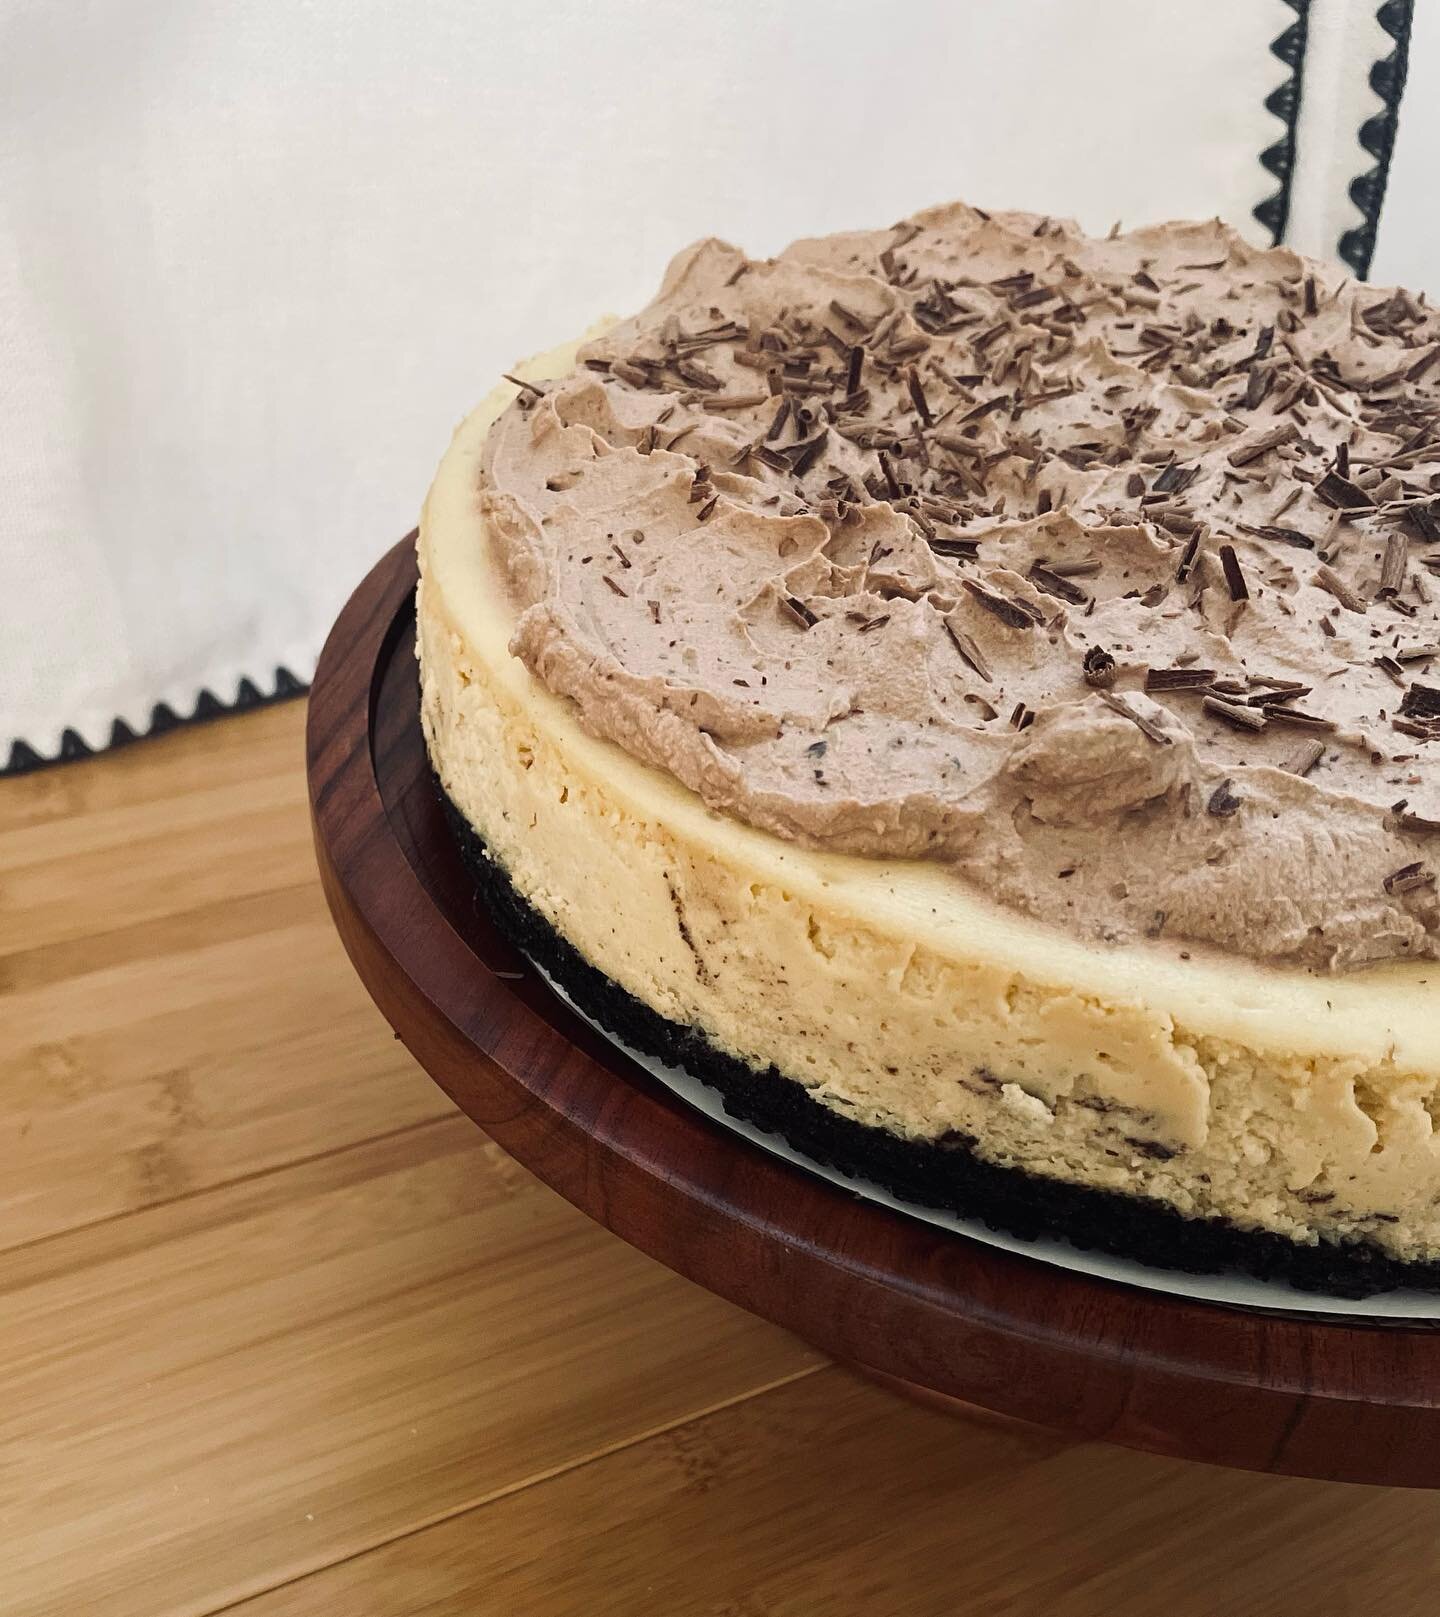 Happy Sunday! 

Feat. our coffee cheesecake topped with dark chocolate &amp; mocha whipped cream on an Oreo crust. A coffee lovers dream ☕️

Still accepting Mothers Day orders!

#tkab #topknot #homebakery #delicious #coffee #sweet #cake #chocolate #h